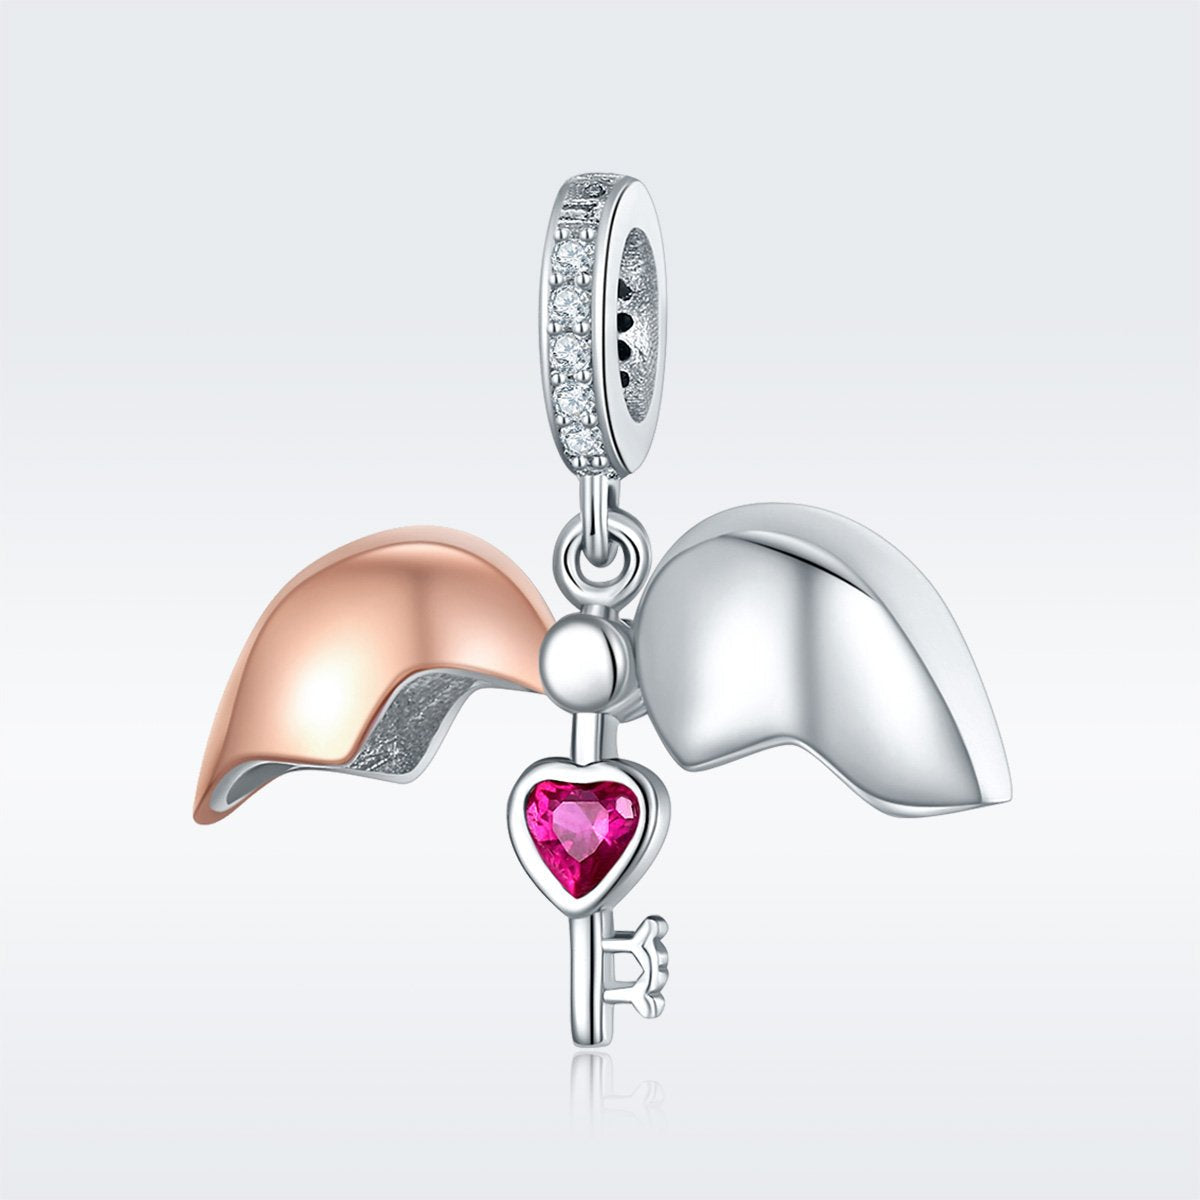 Sterling 925 silver charm the key in heart pendant fits Pandora charm and European charm bracelet Xaxe.com